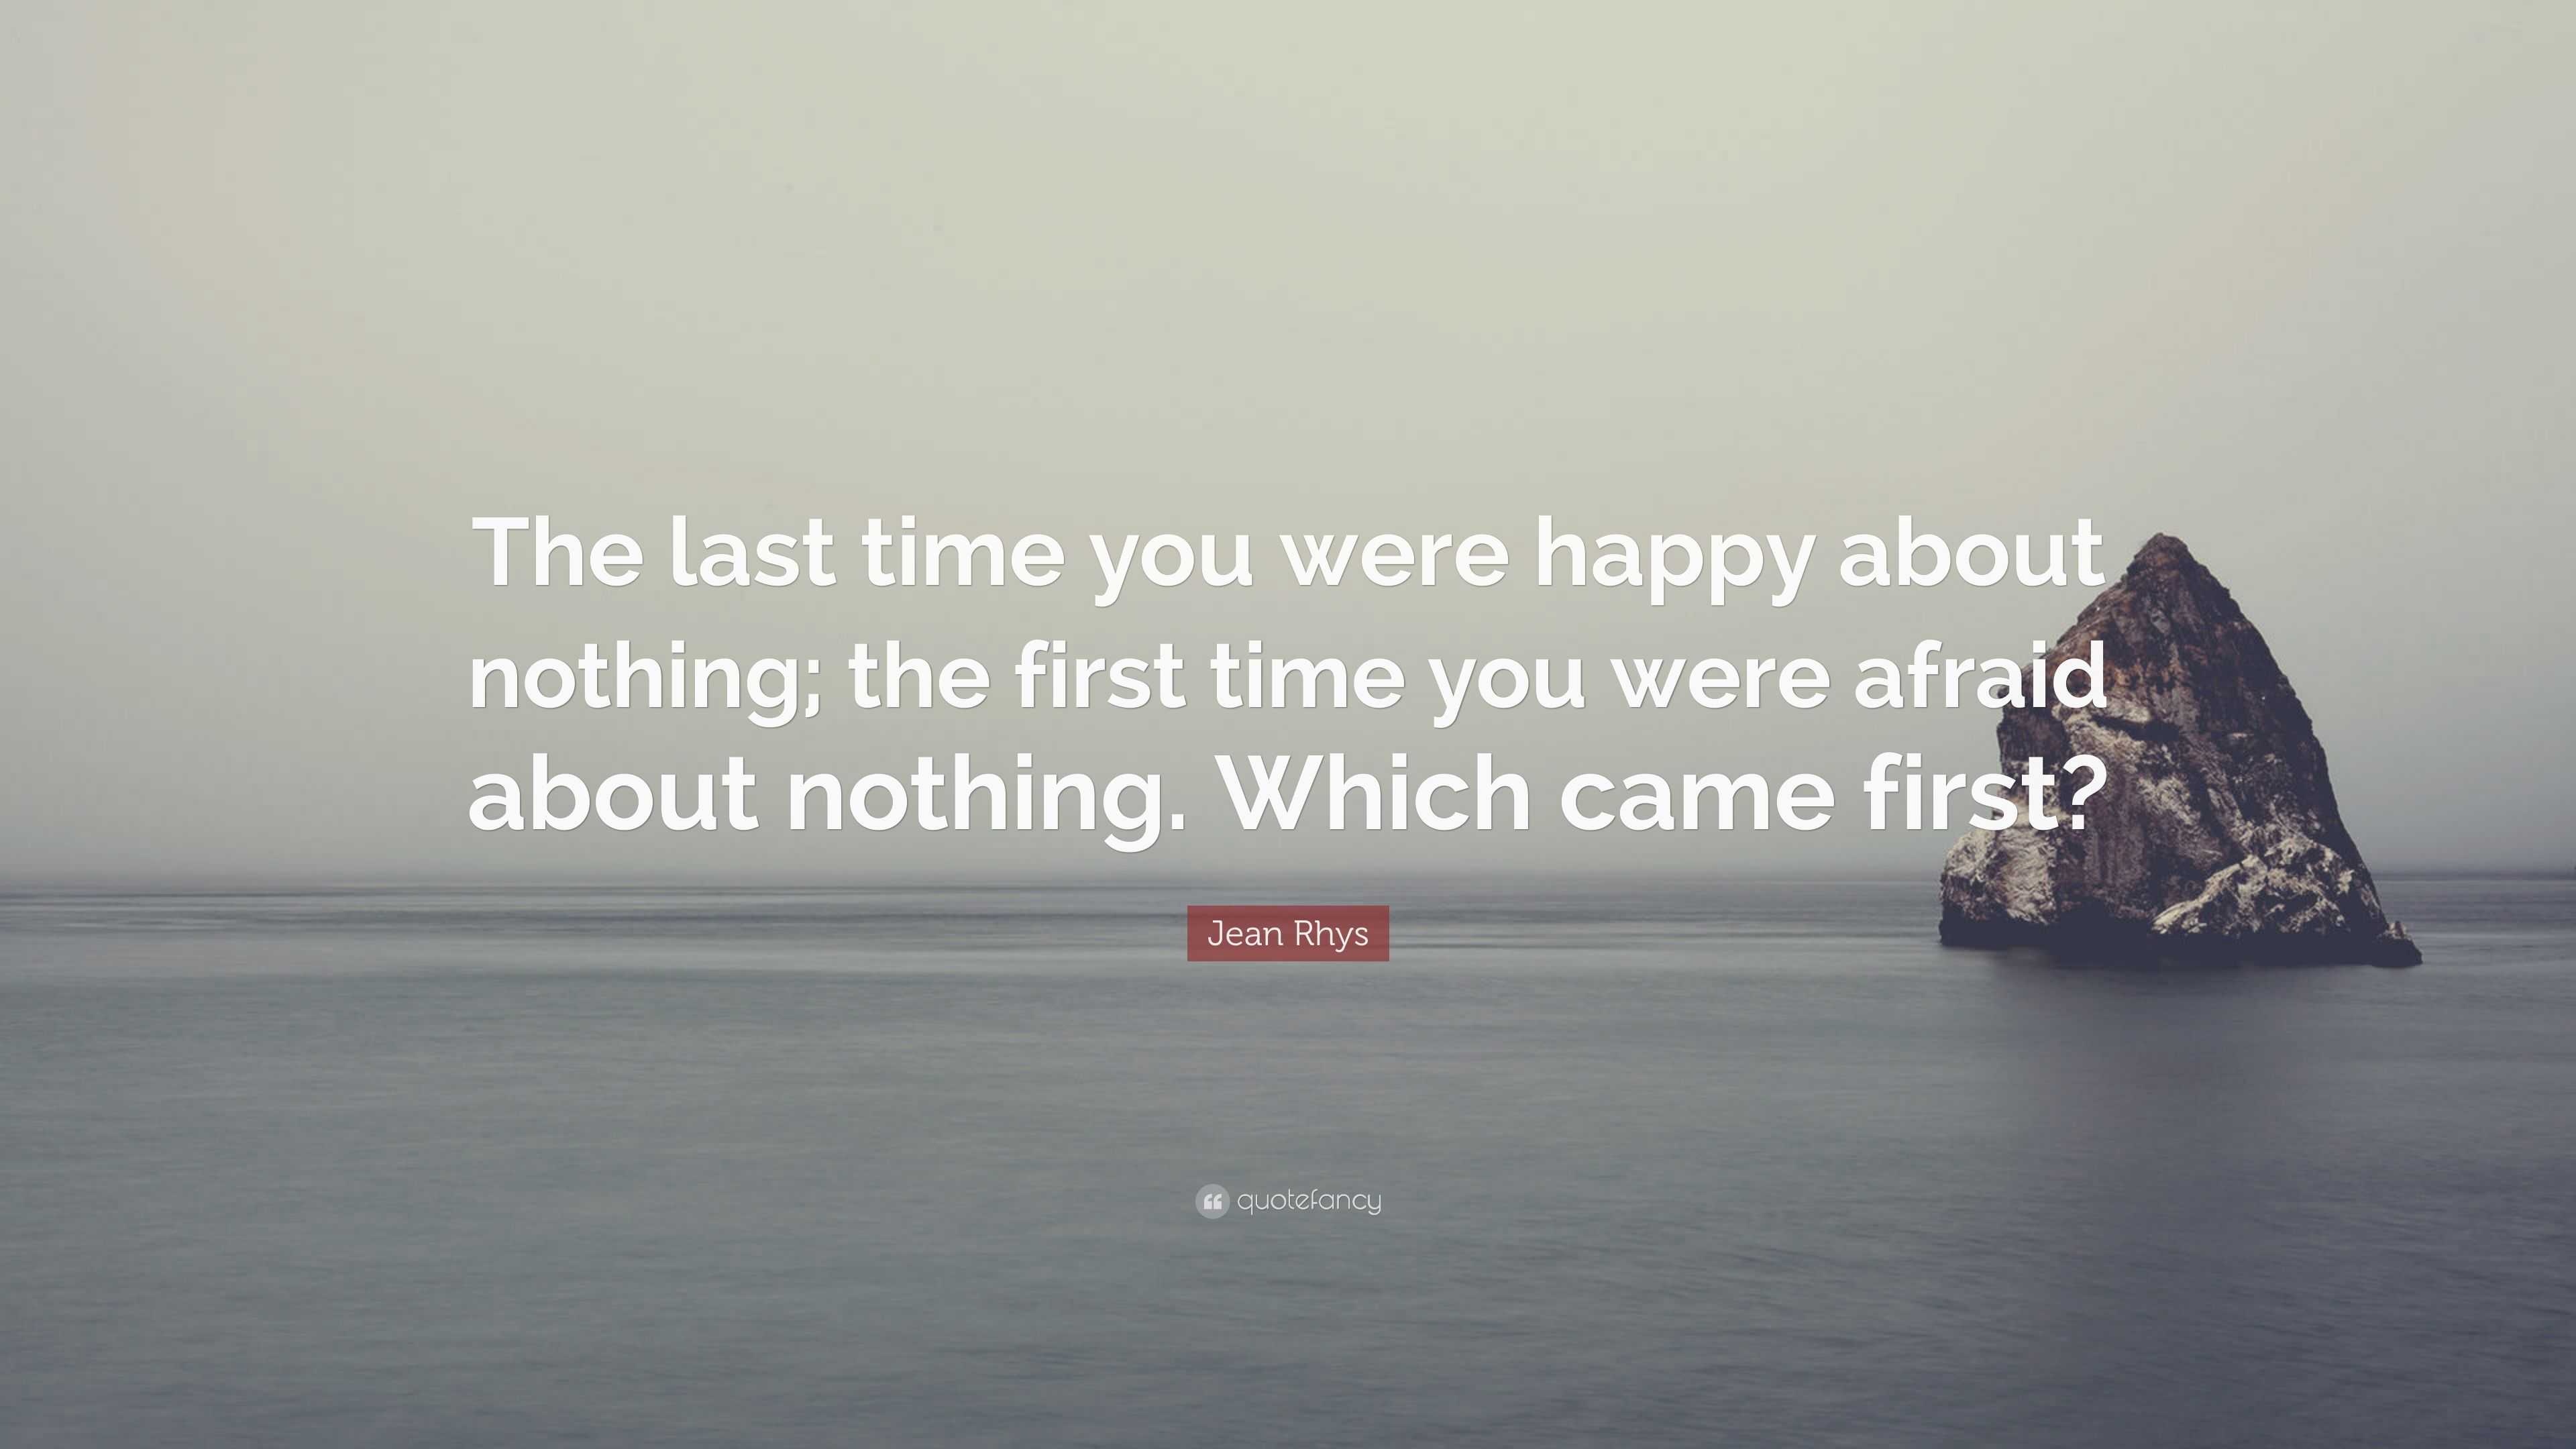 Jean Rhys Quote: “The last time you were happy about nothing; the first ...